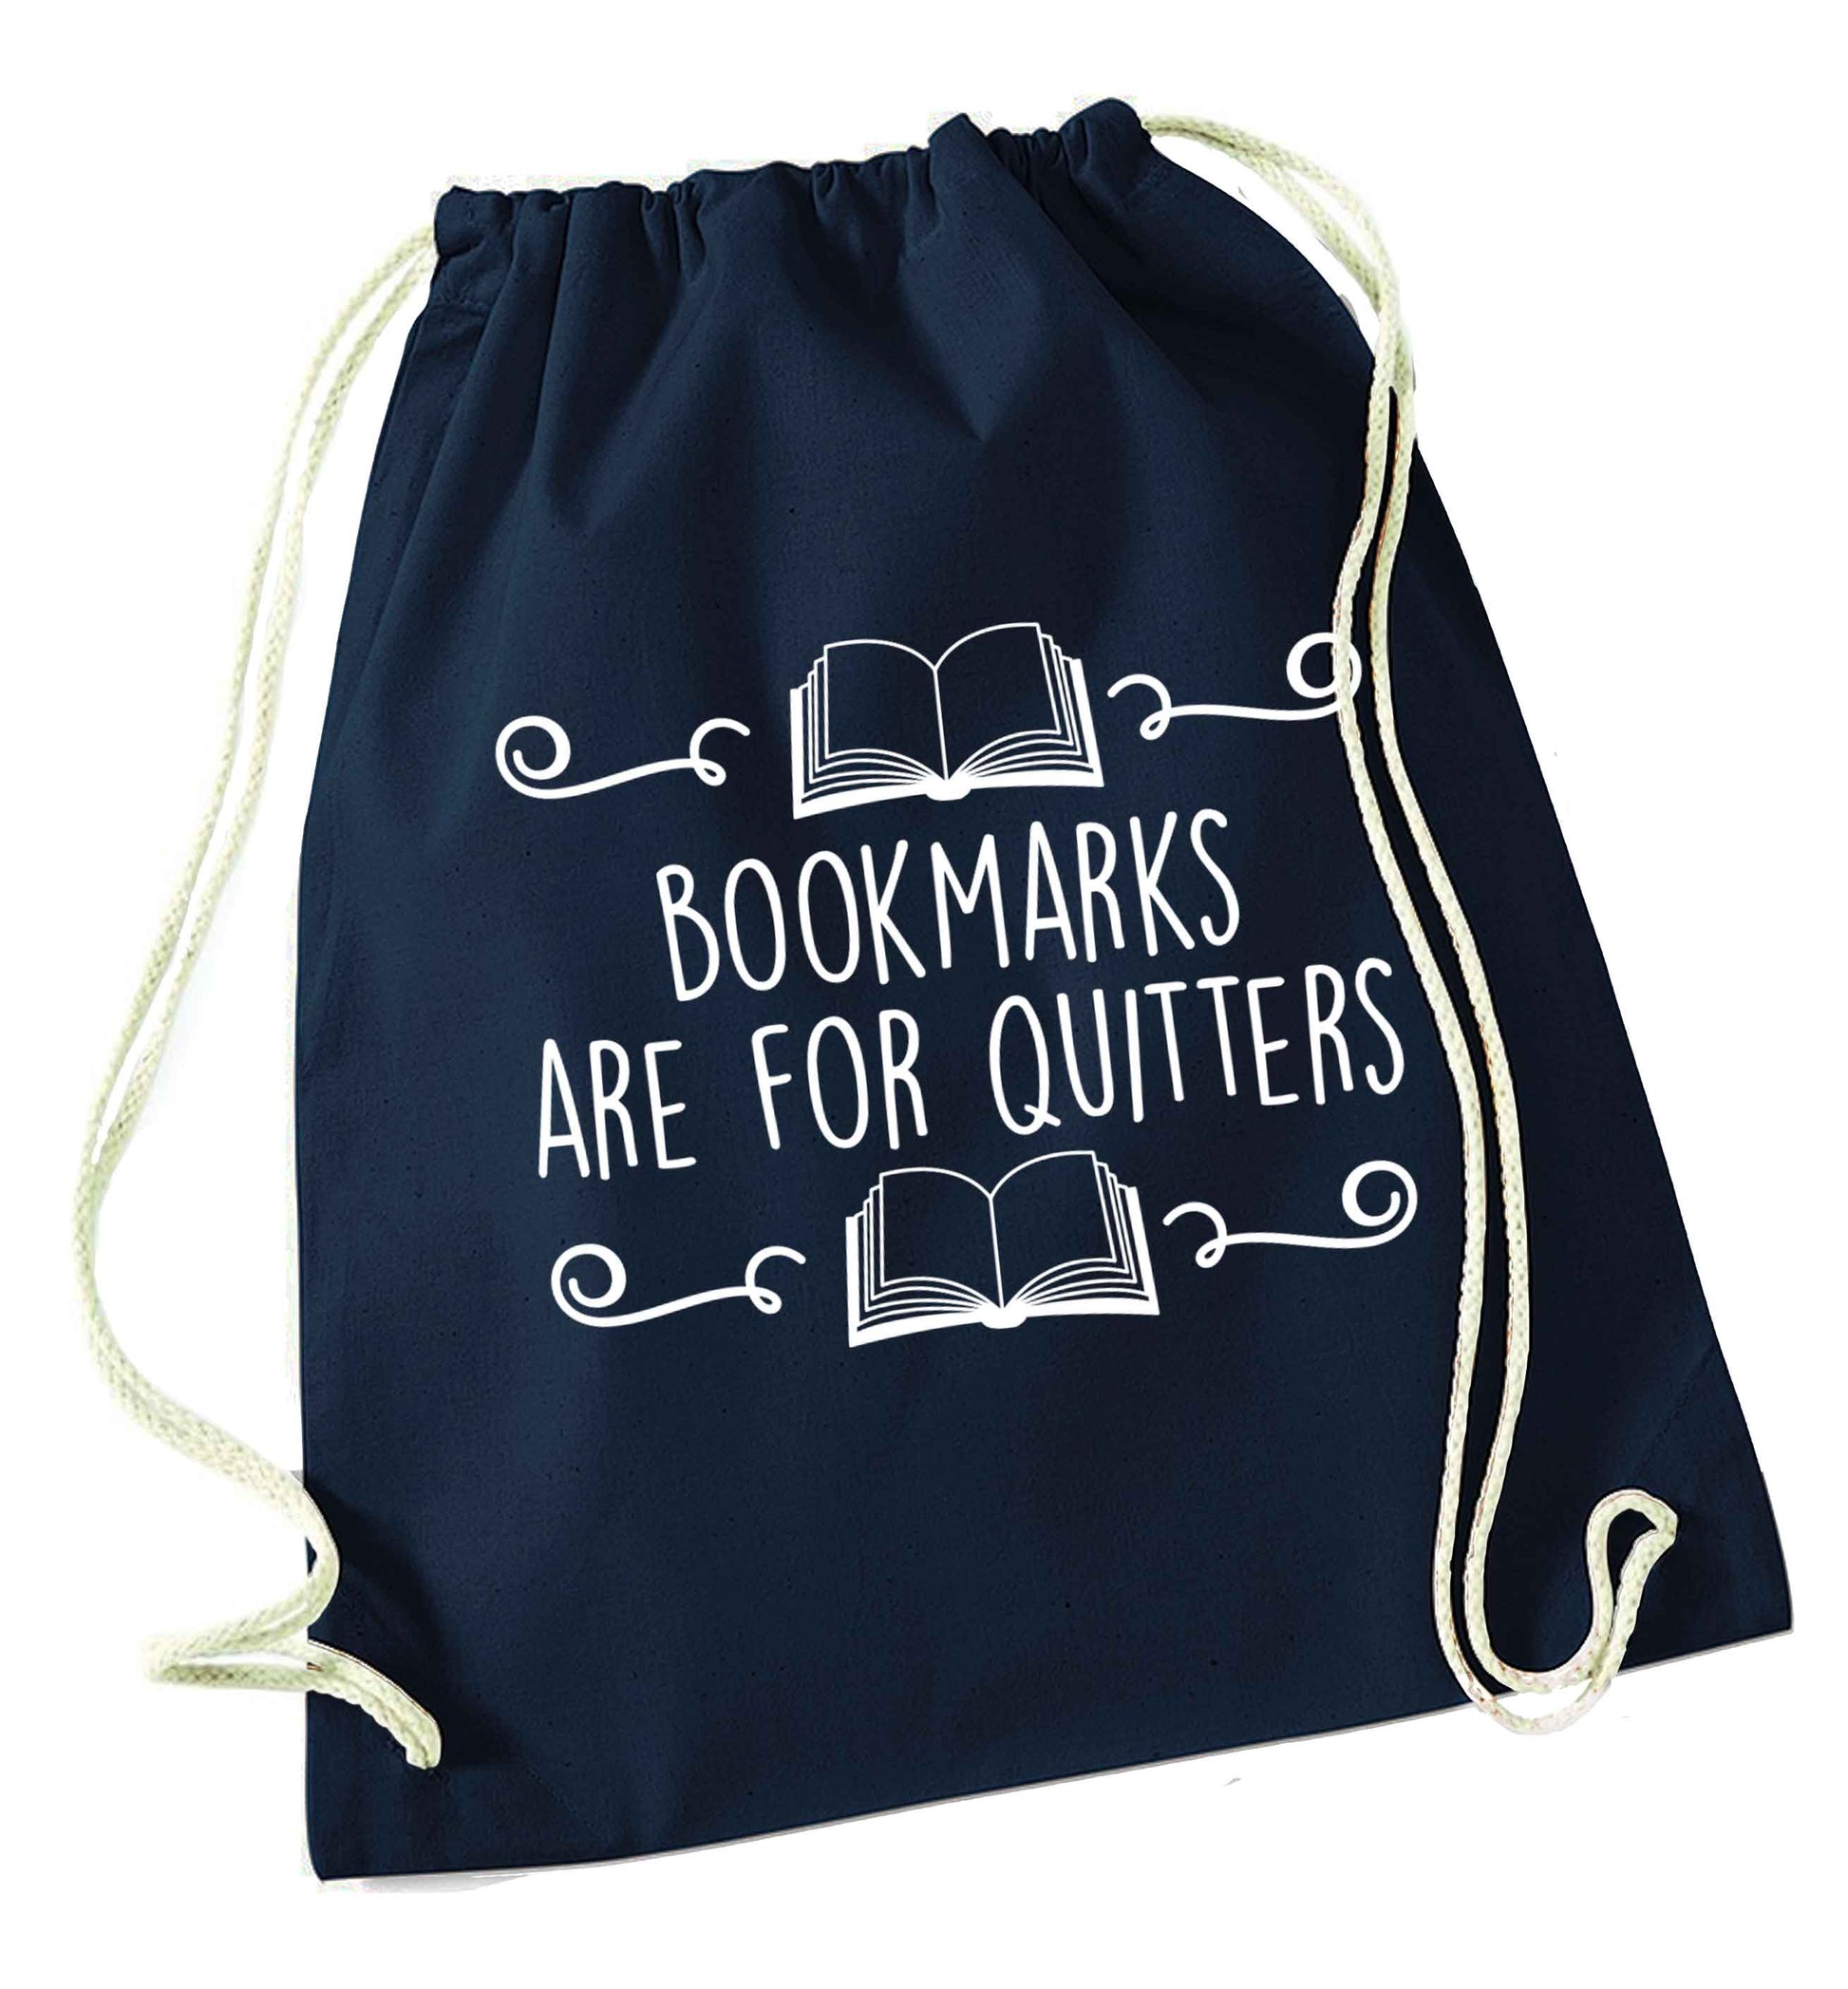 Bookmarks are for quitters navy drawstring bag